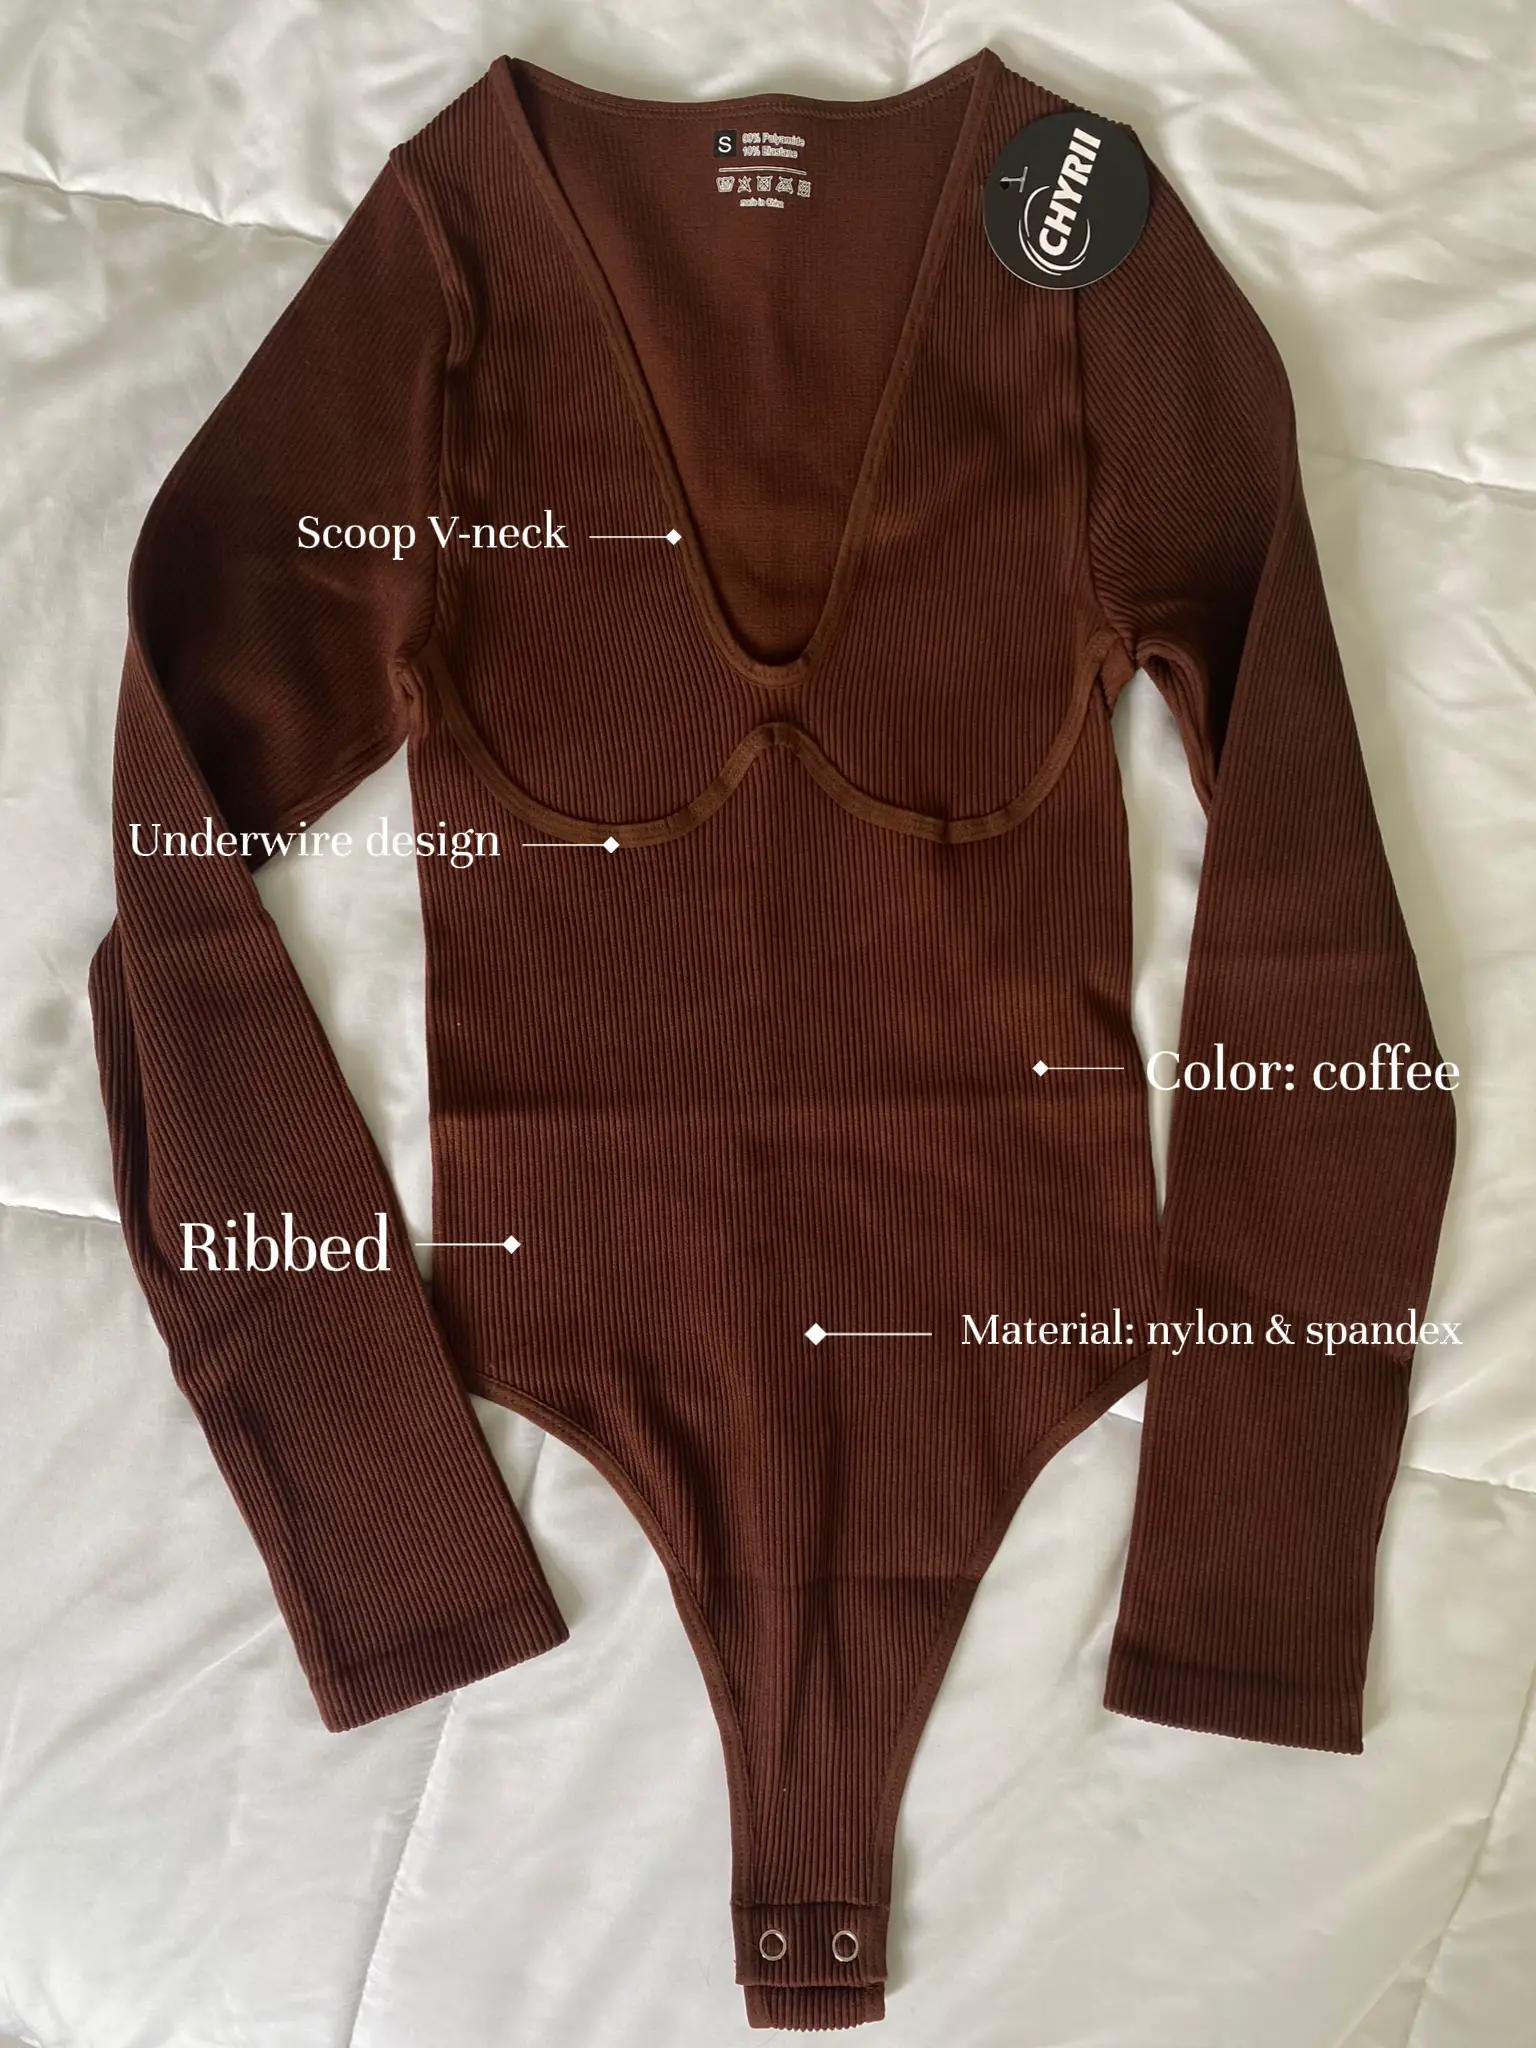 The Perfect Bodysuit, Gallery posted by Shaelen Serrano